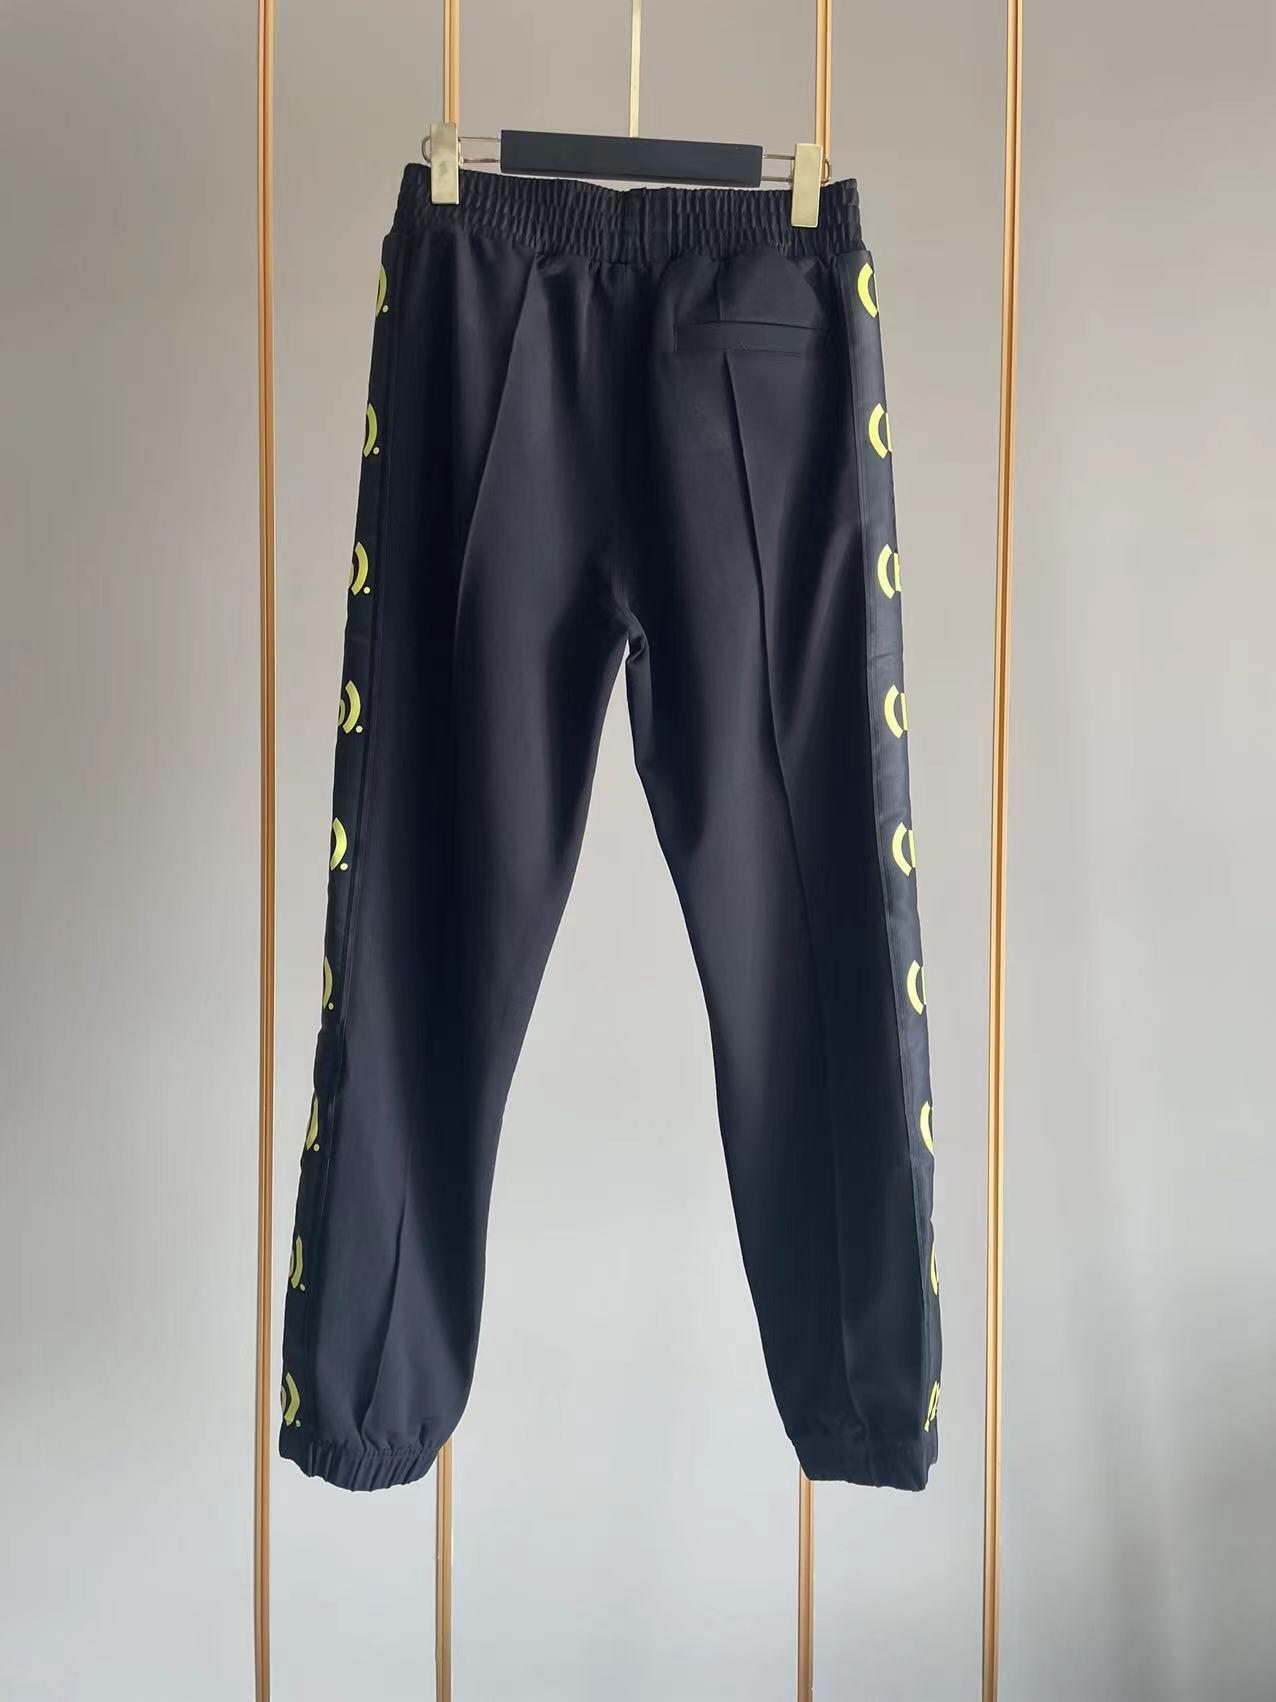 slim-fit-jogger-pants-in-jersey-with-b-printed-givenchy-bands-6622_16845014143-1000